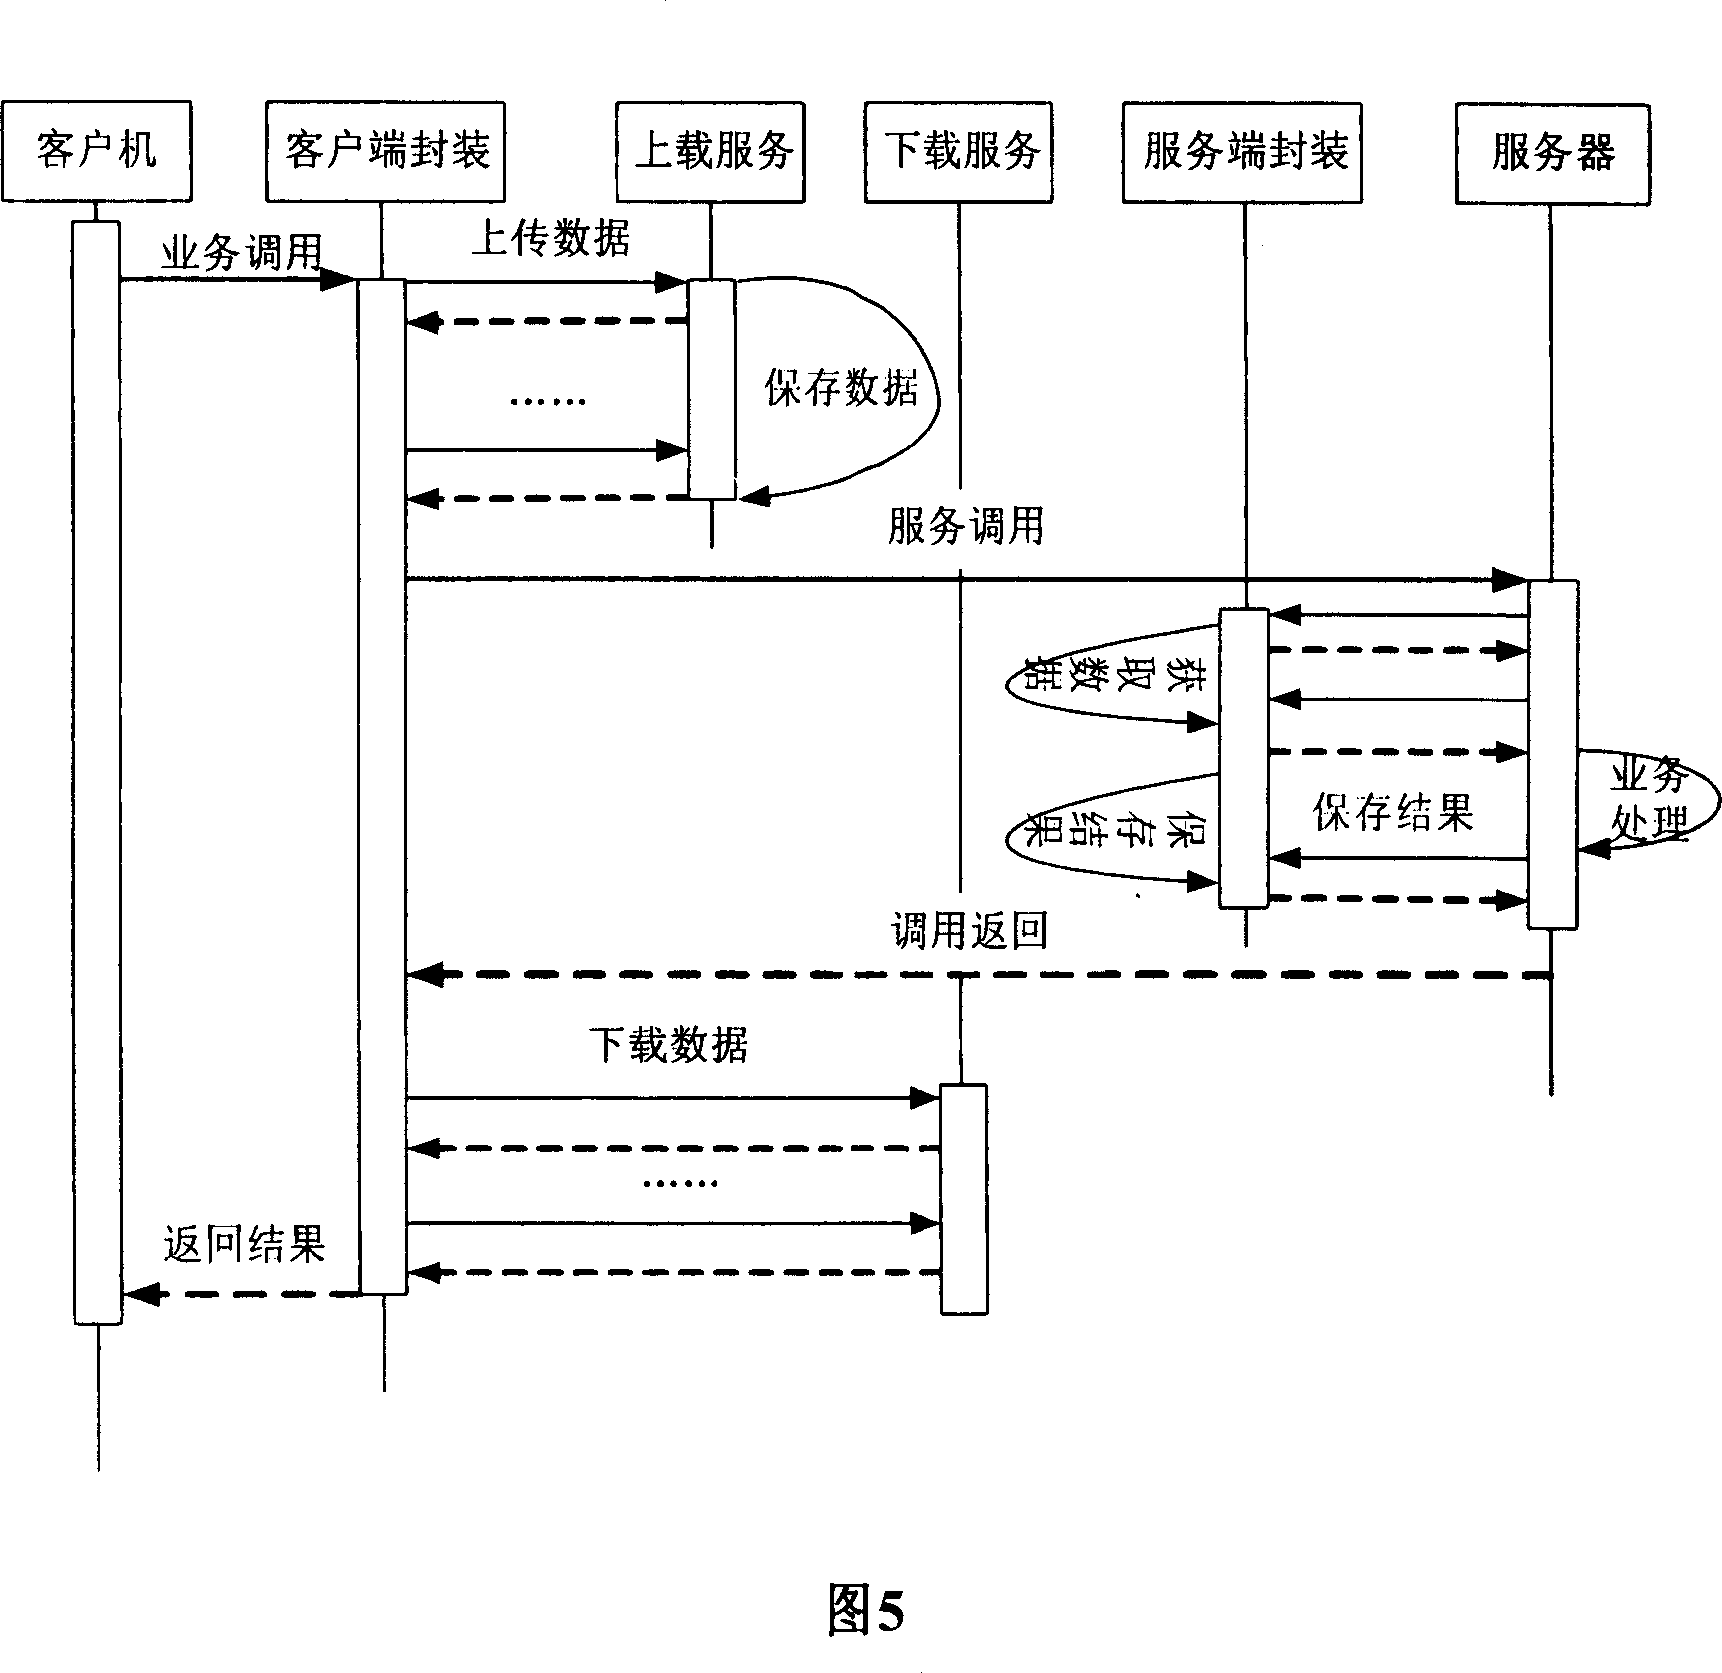 On-line business processing system middleware package method